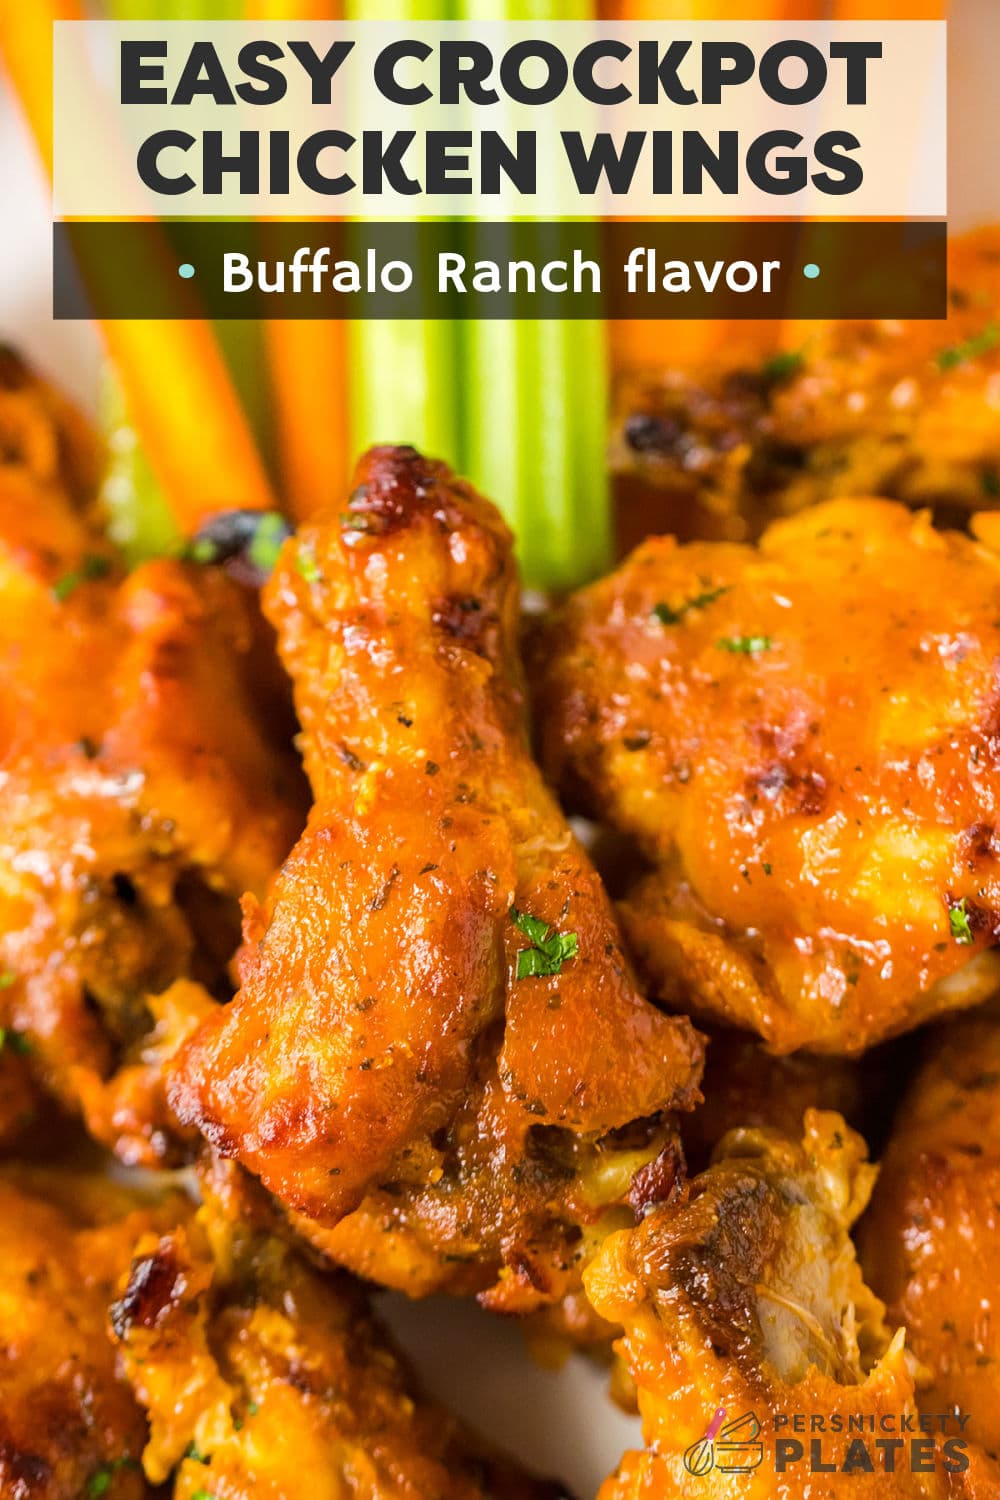 Buffalo ranch crockpot chicken wings combine buffalo sauce and ranch into one utterly delicious flavor combination. Smothered in a tangy, spicy, zesty sauce, the wings are slow cooked until the meat falls off the bones then made crispy and caramelized under the broiler! | www.persnicketyplates.com